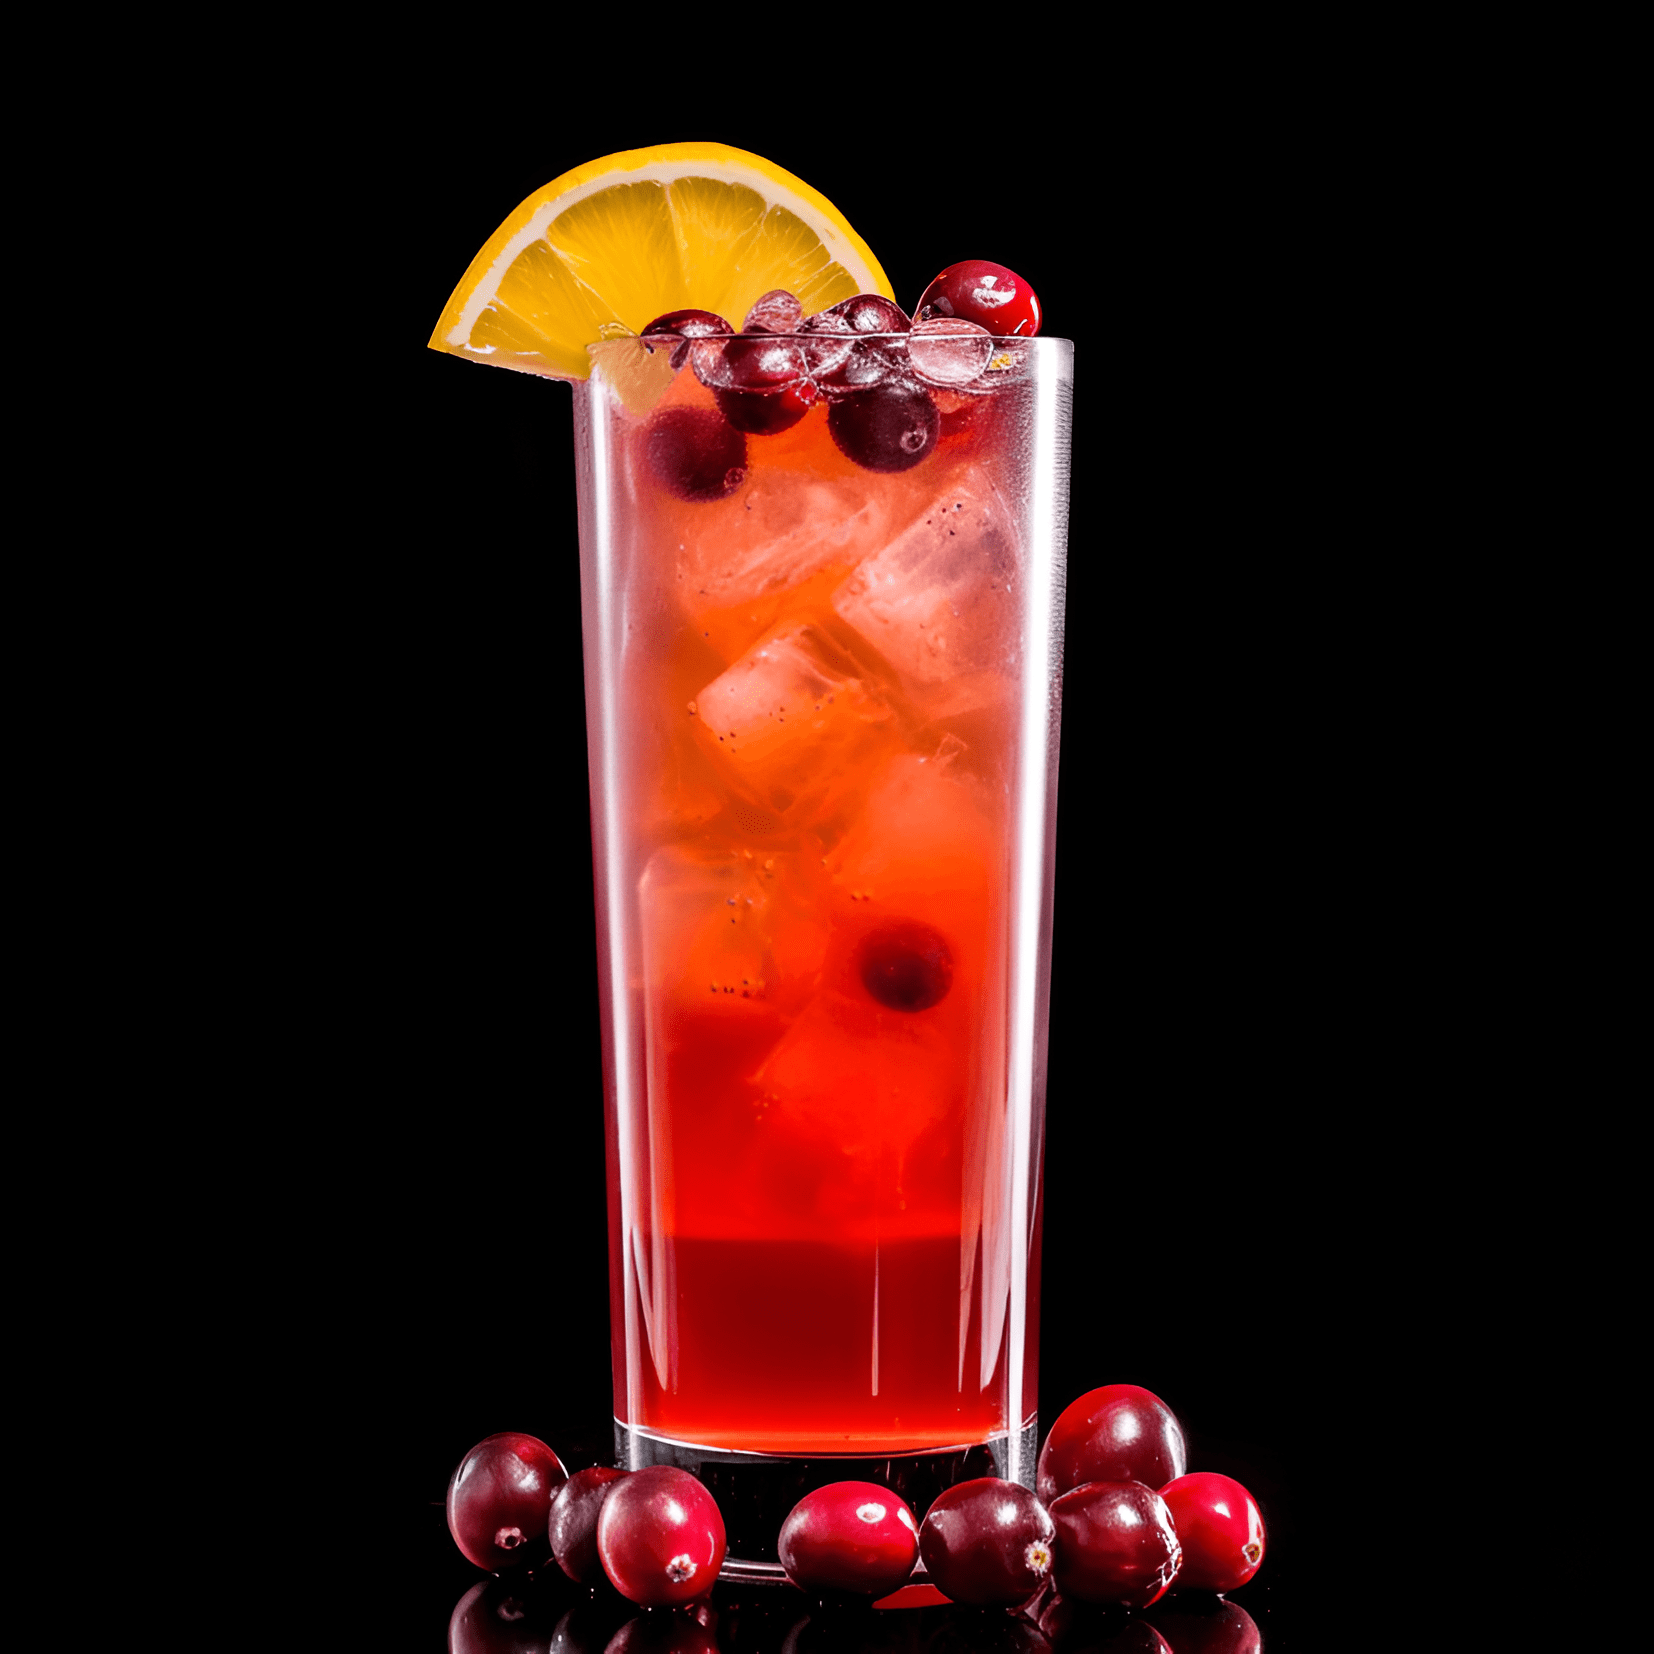 The Cranberry Cooler has a delightful balance of sweet and tart flavors, with a refreshing and crisp taste. The combination of cranberry juice, orange juice, and lemon-lime soda creates a fruity and zesty sensation, while the vodka adds a subtle kick.